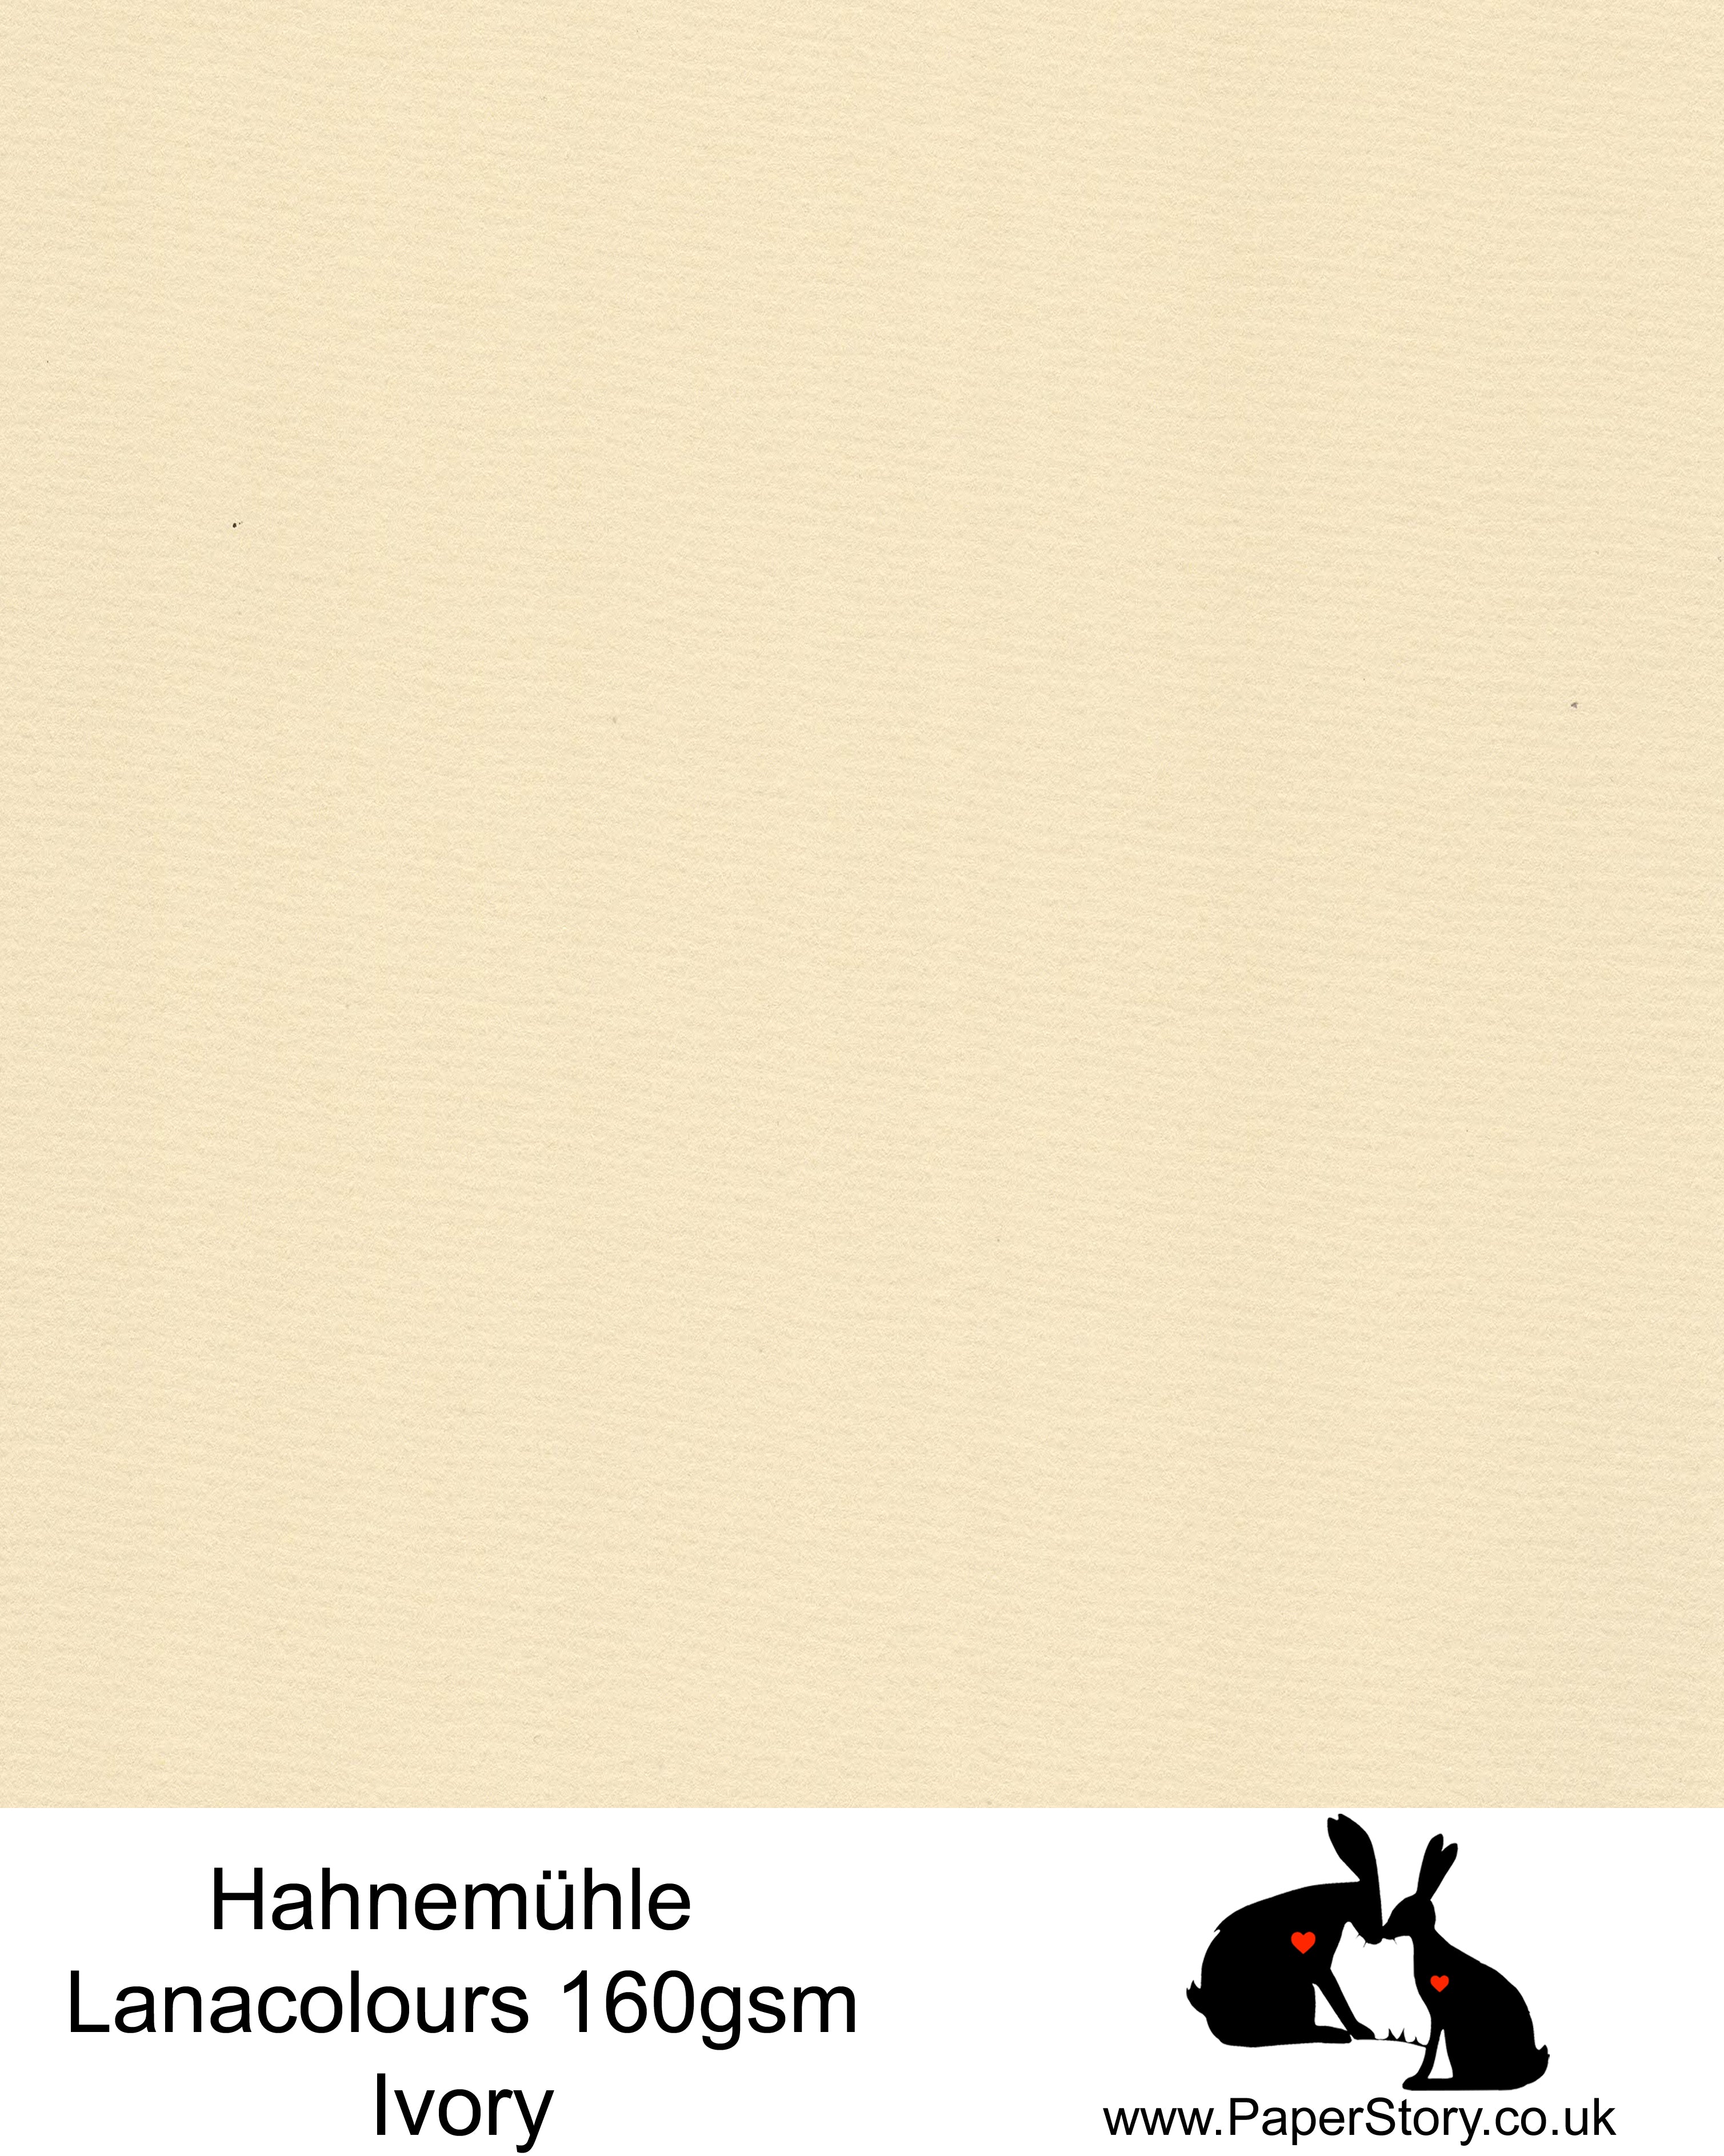 Hahnemühle Lana Colours Ivory pastel hammered paper 160 gsm. Artist Premium Pastel  and Papercutting Papers 160 gsm often described as hammered paper. This high quality artist paper, can be used for papercutting as well as mixed media,